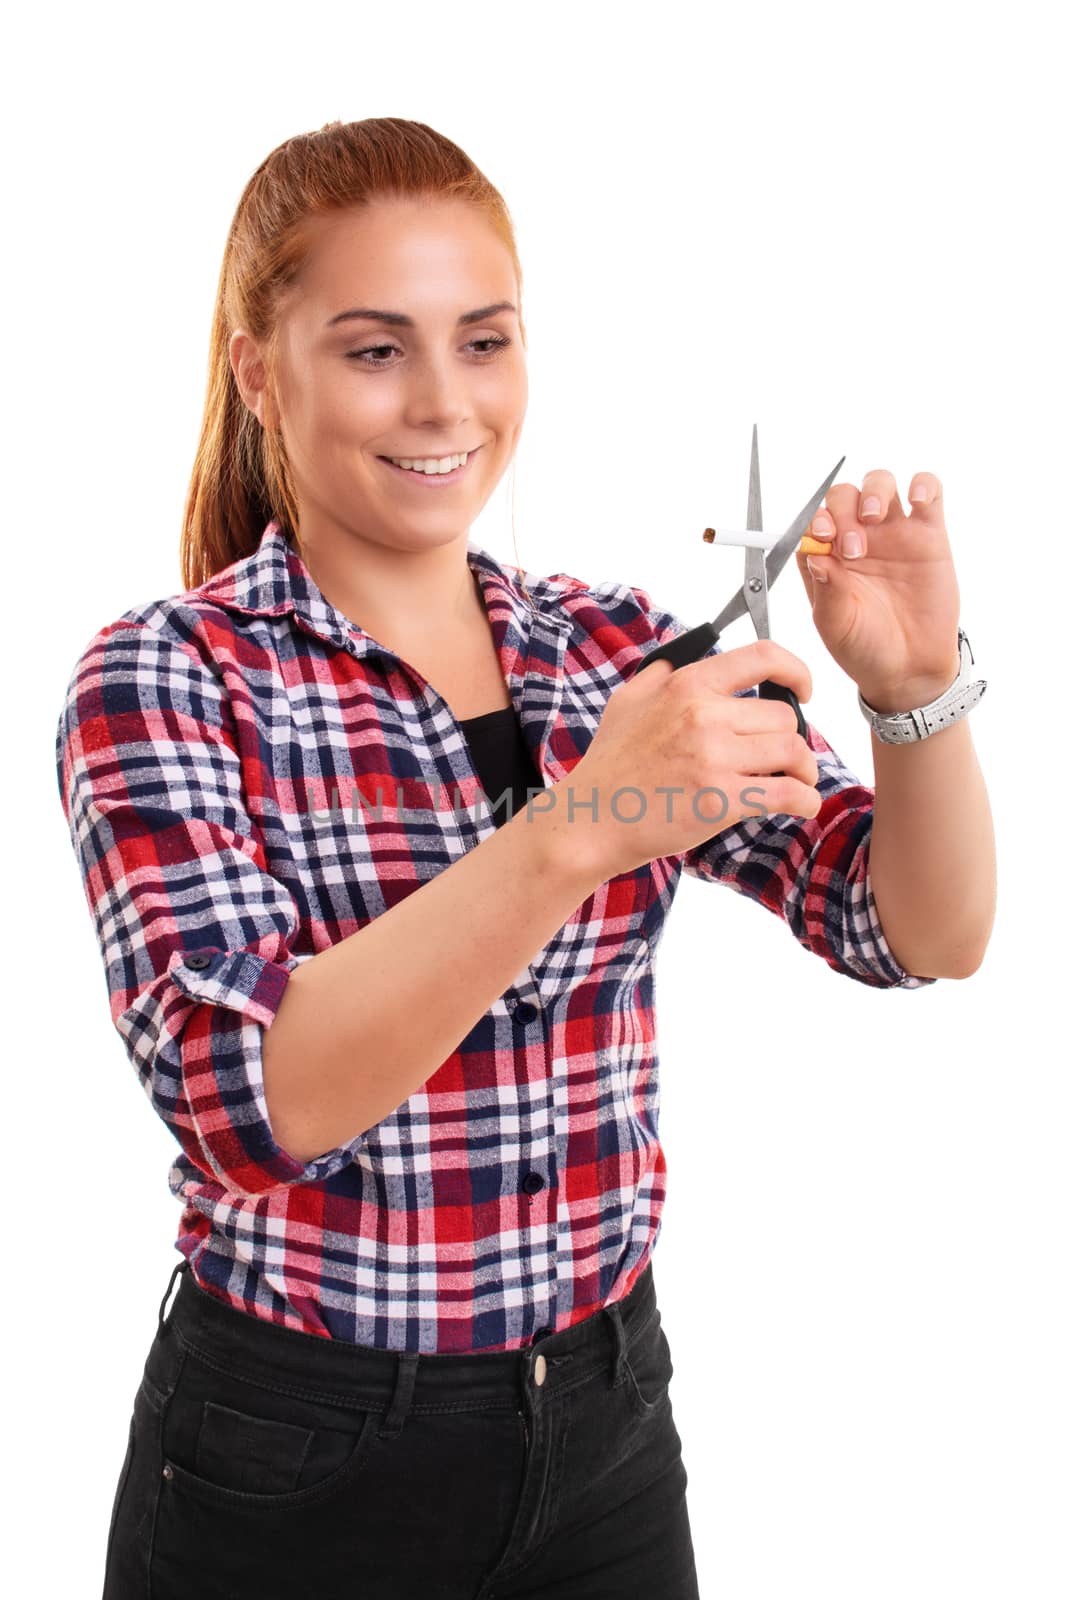 Beautiful young redhead woman smiling and cutting a cigarette with scissors, isolated on white background. Cheerful girl giving up smoking. Stop smoking concept. 